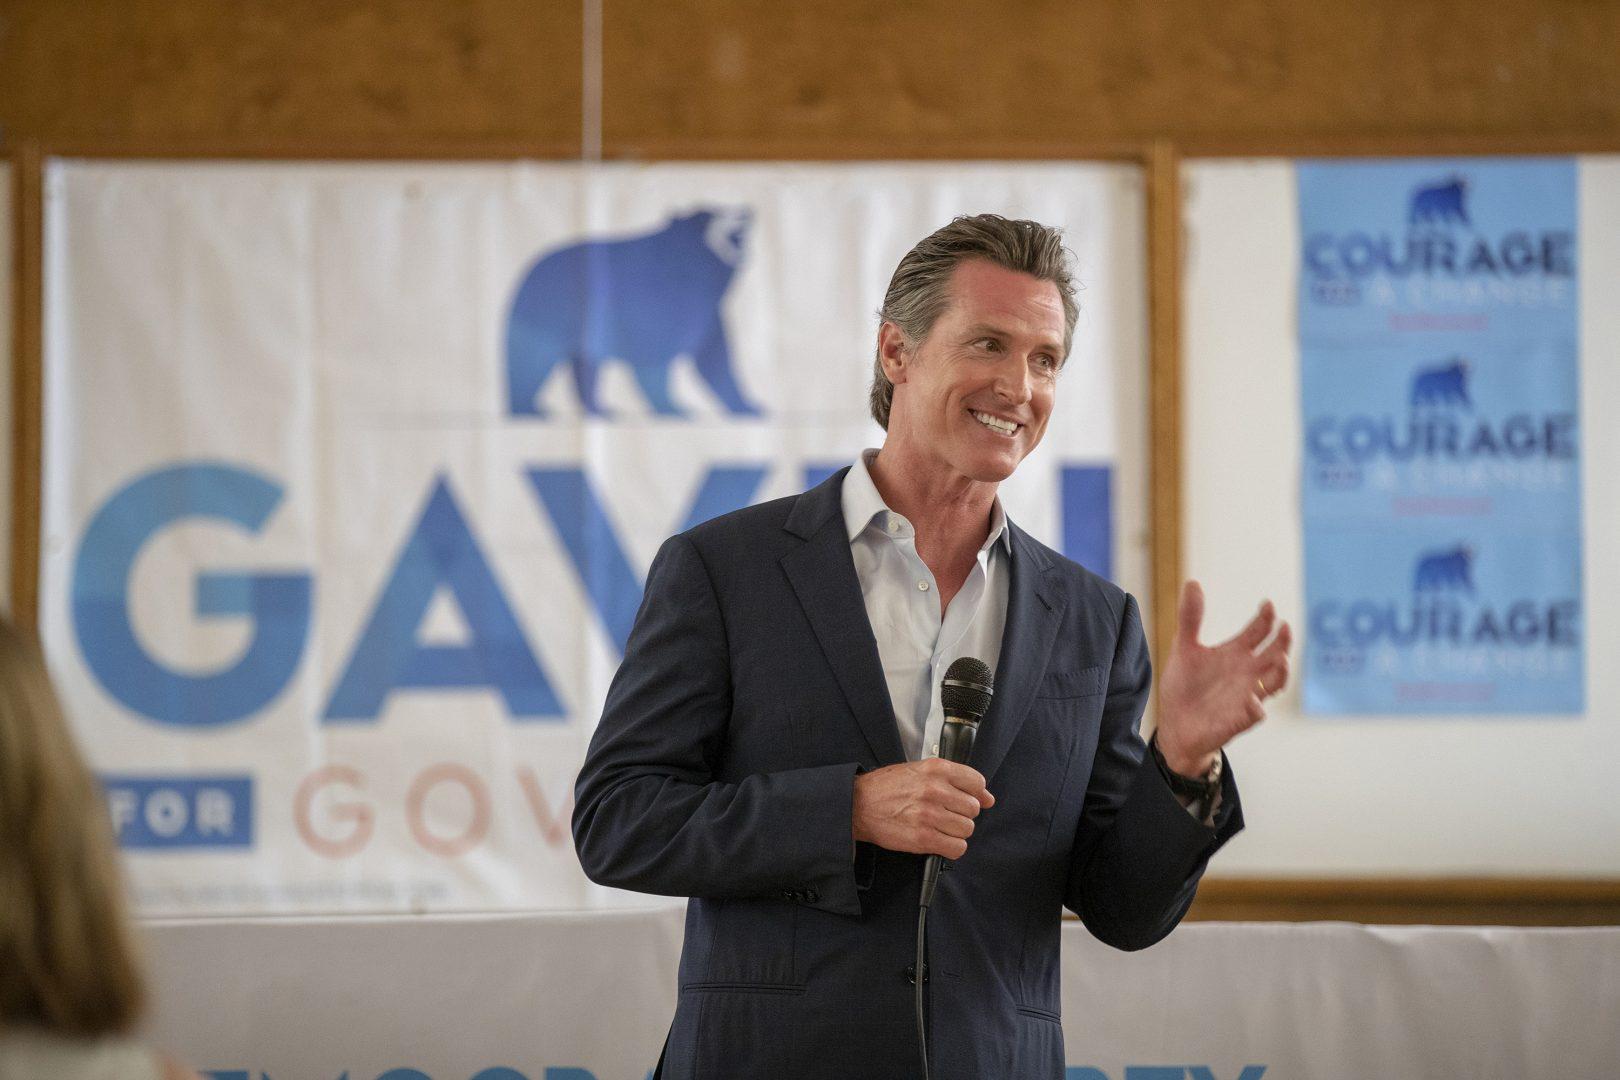 Lt. Gov. Gavin Newsom, Democratic candidate for governor of California and former San Francisco mayor, speaks to members of the Democratic Party of Orange County at UA Plumbers & Steamfitters Local 582 in Orange, Calif., on July 12, 2018. (Allen J. Schaben/Los Angeles Times/TNS)